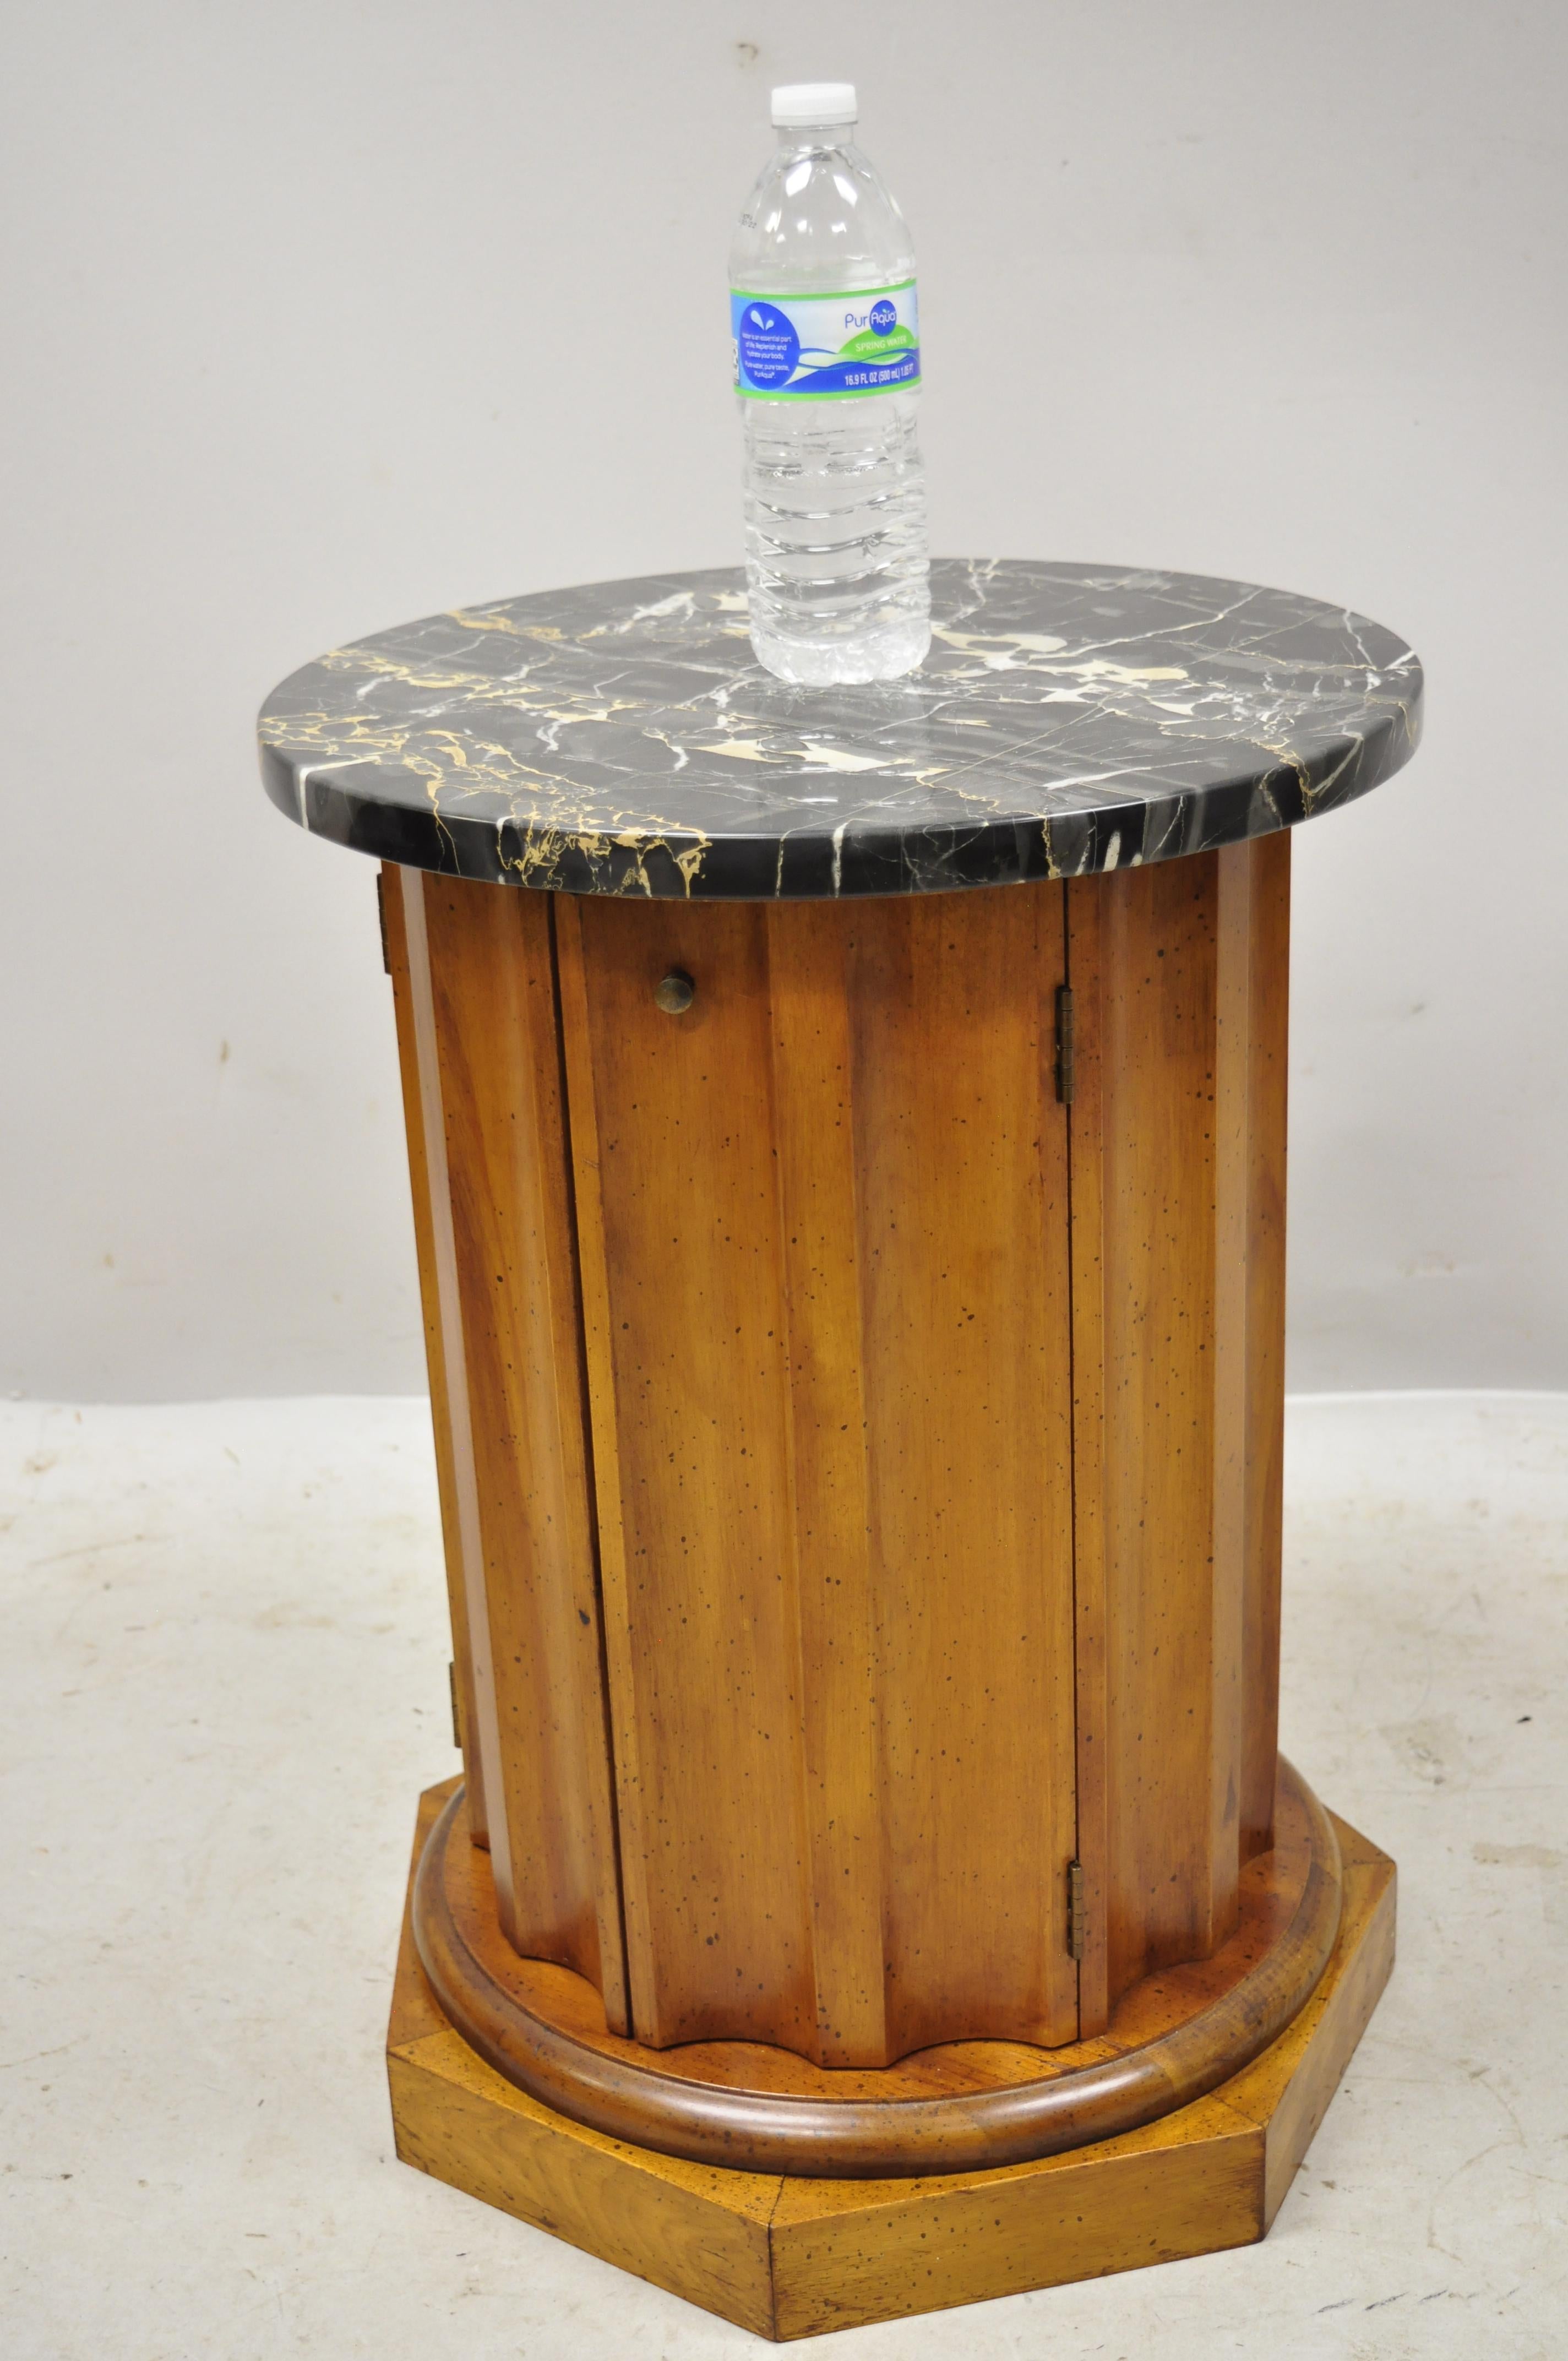 Vintage Italian Classical Style Round Marble Top Fluted Column Cabinet Pedestal Stand. Item features round marble top, solid wood fluted column cabinet, 2 swing doors, original label, 1 wooden shelf, very nice vintage item, great style and form.